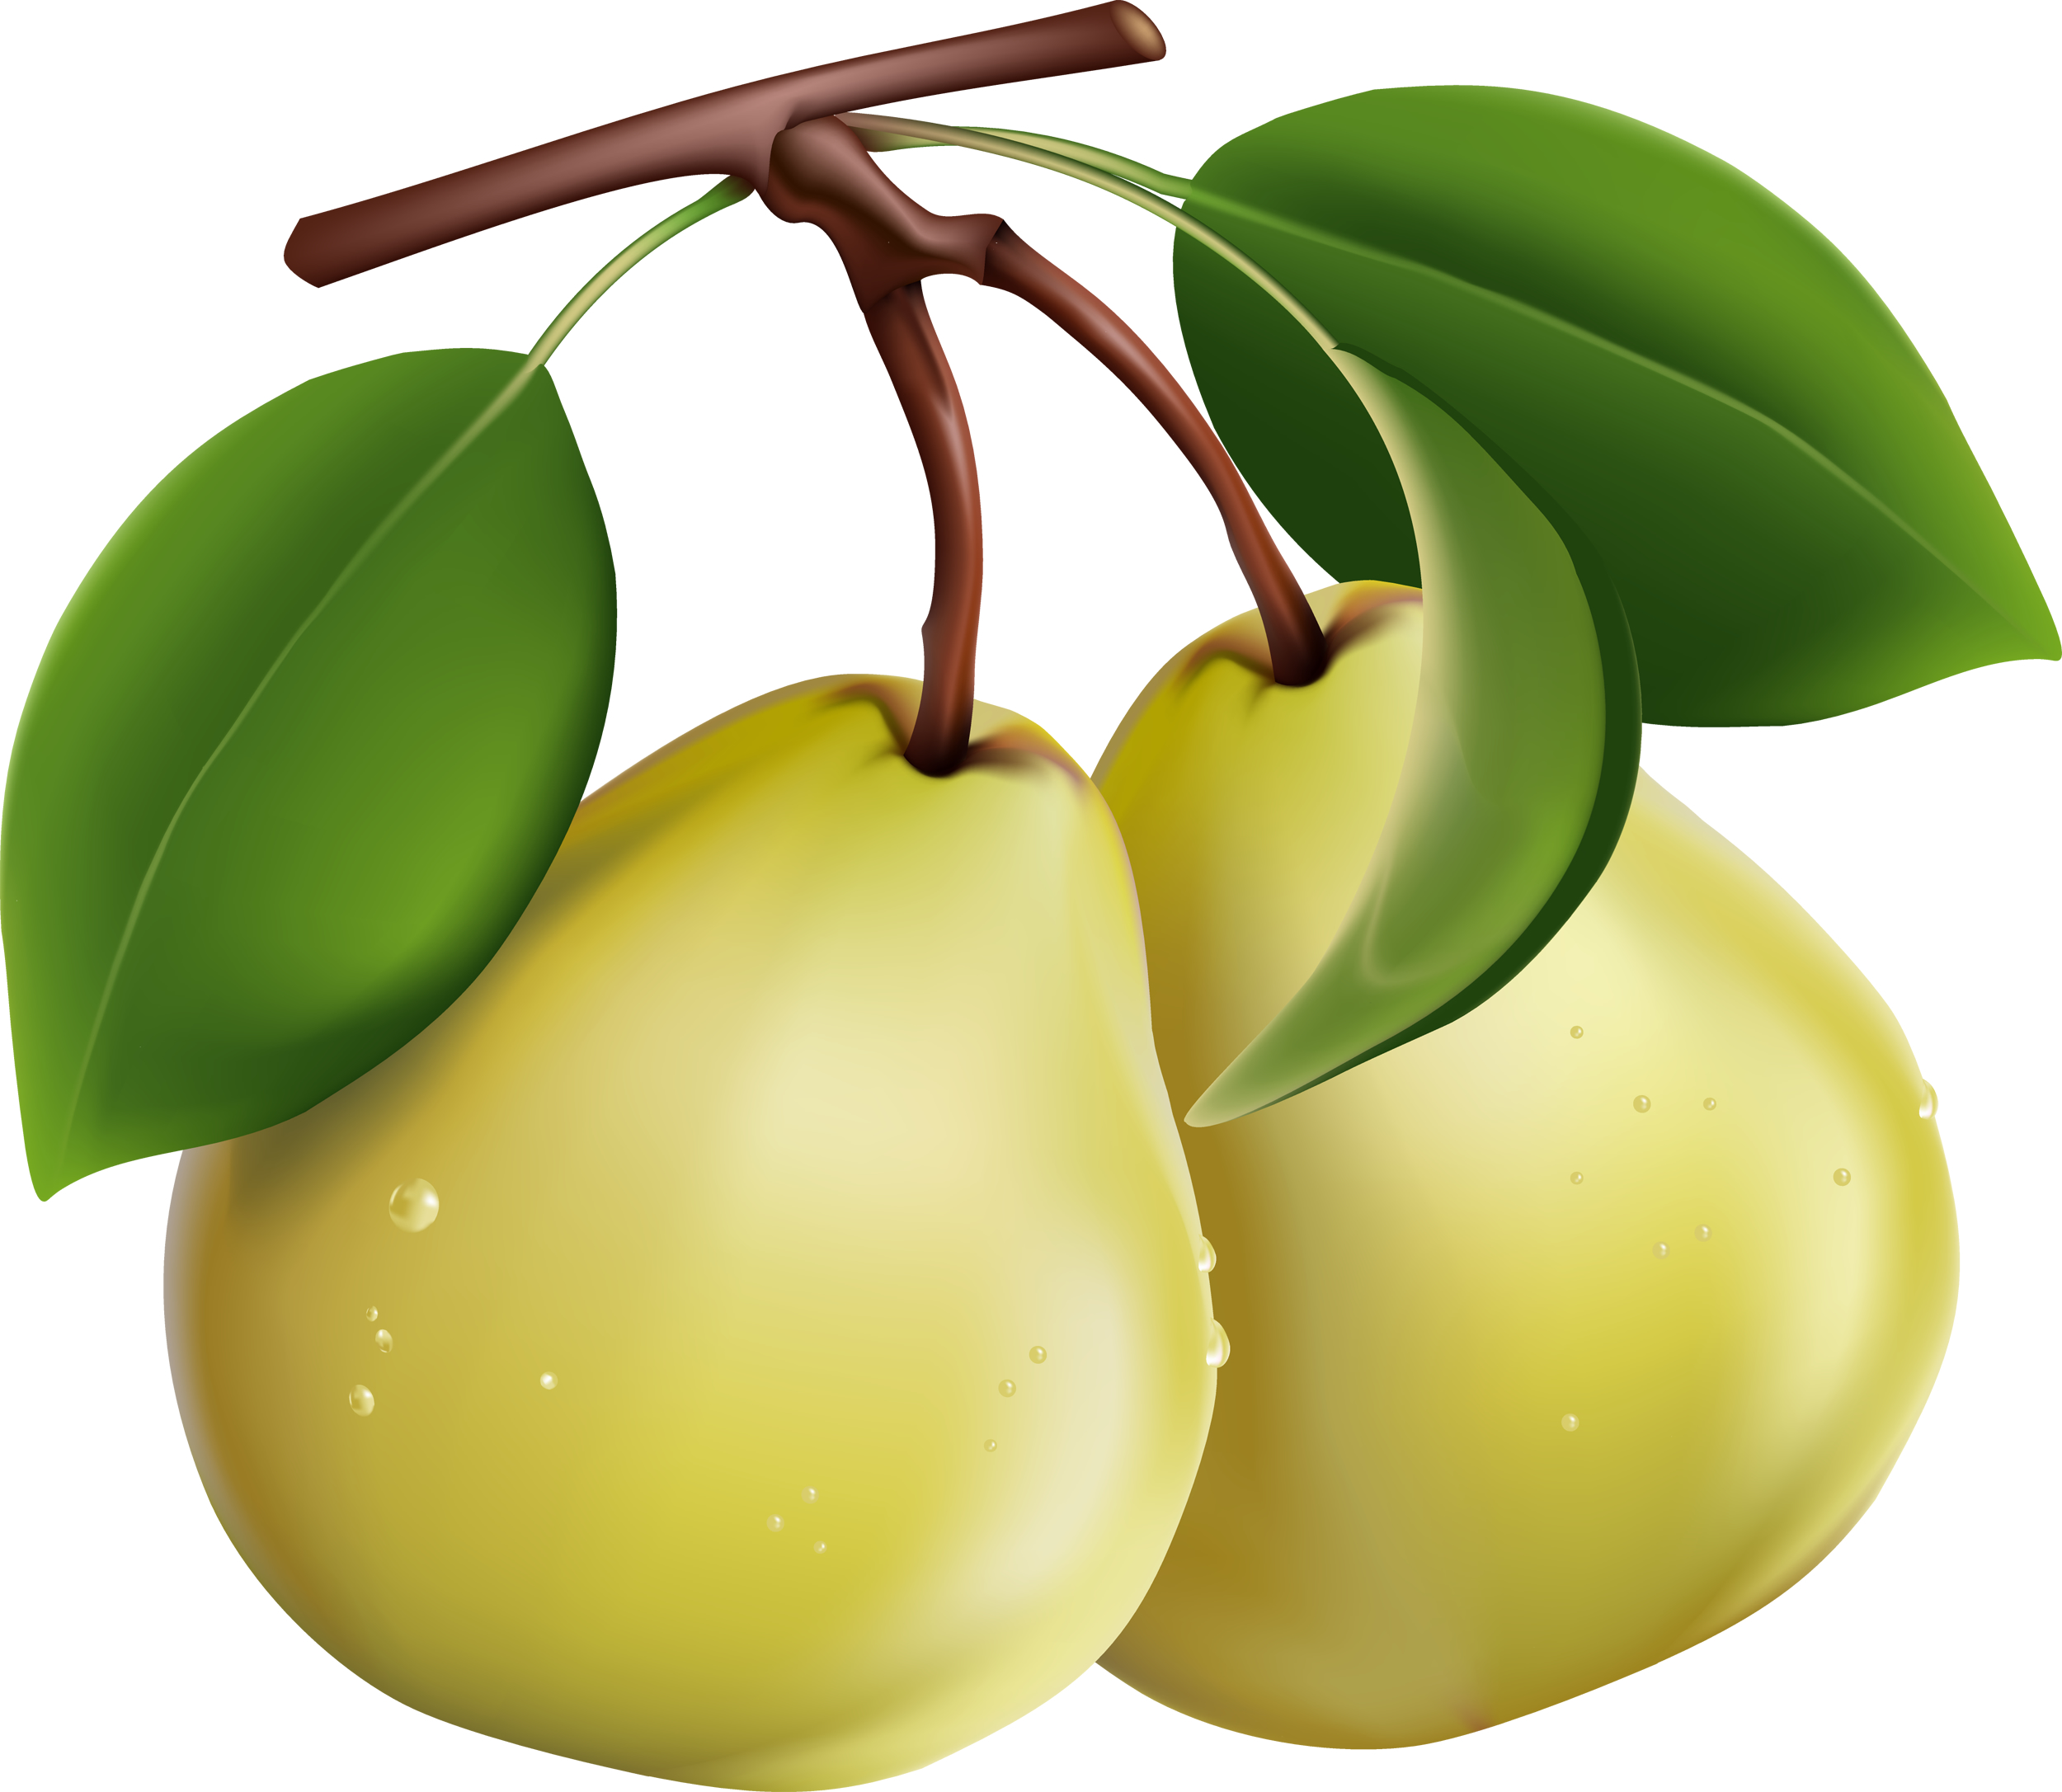 Download Clipart, Pears, Photo - Pear Fruit Benefits For Babies , HD Wallpaper & Backgrounds